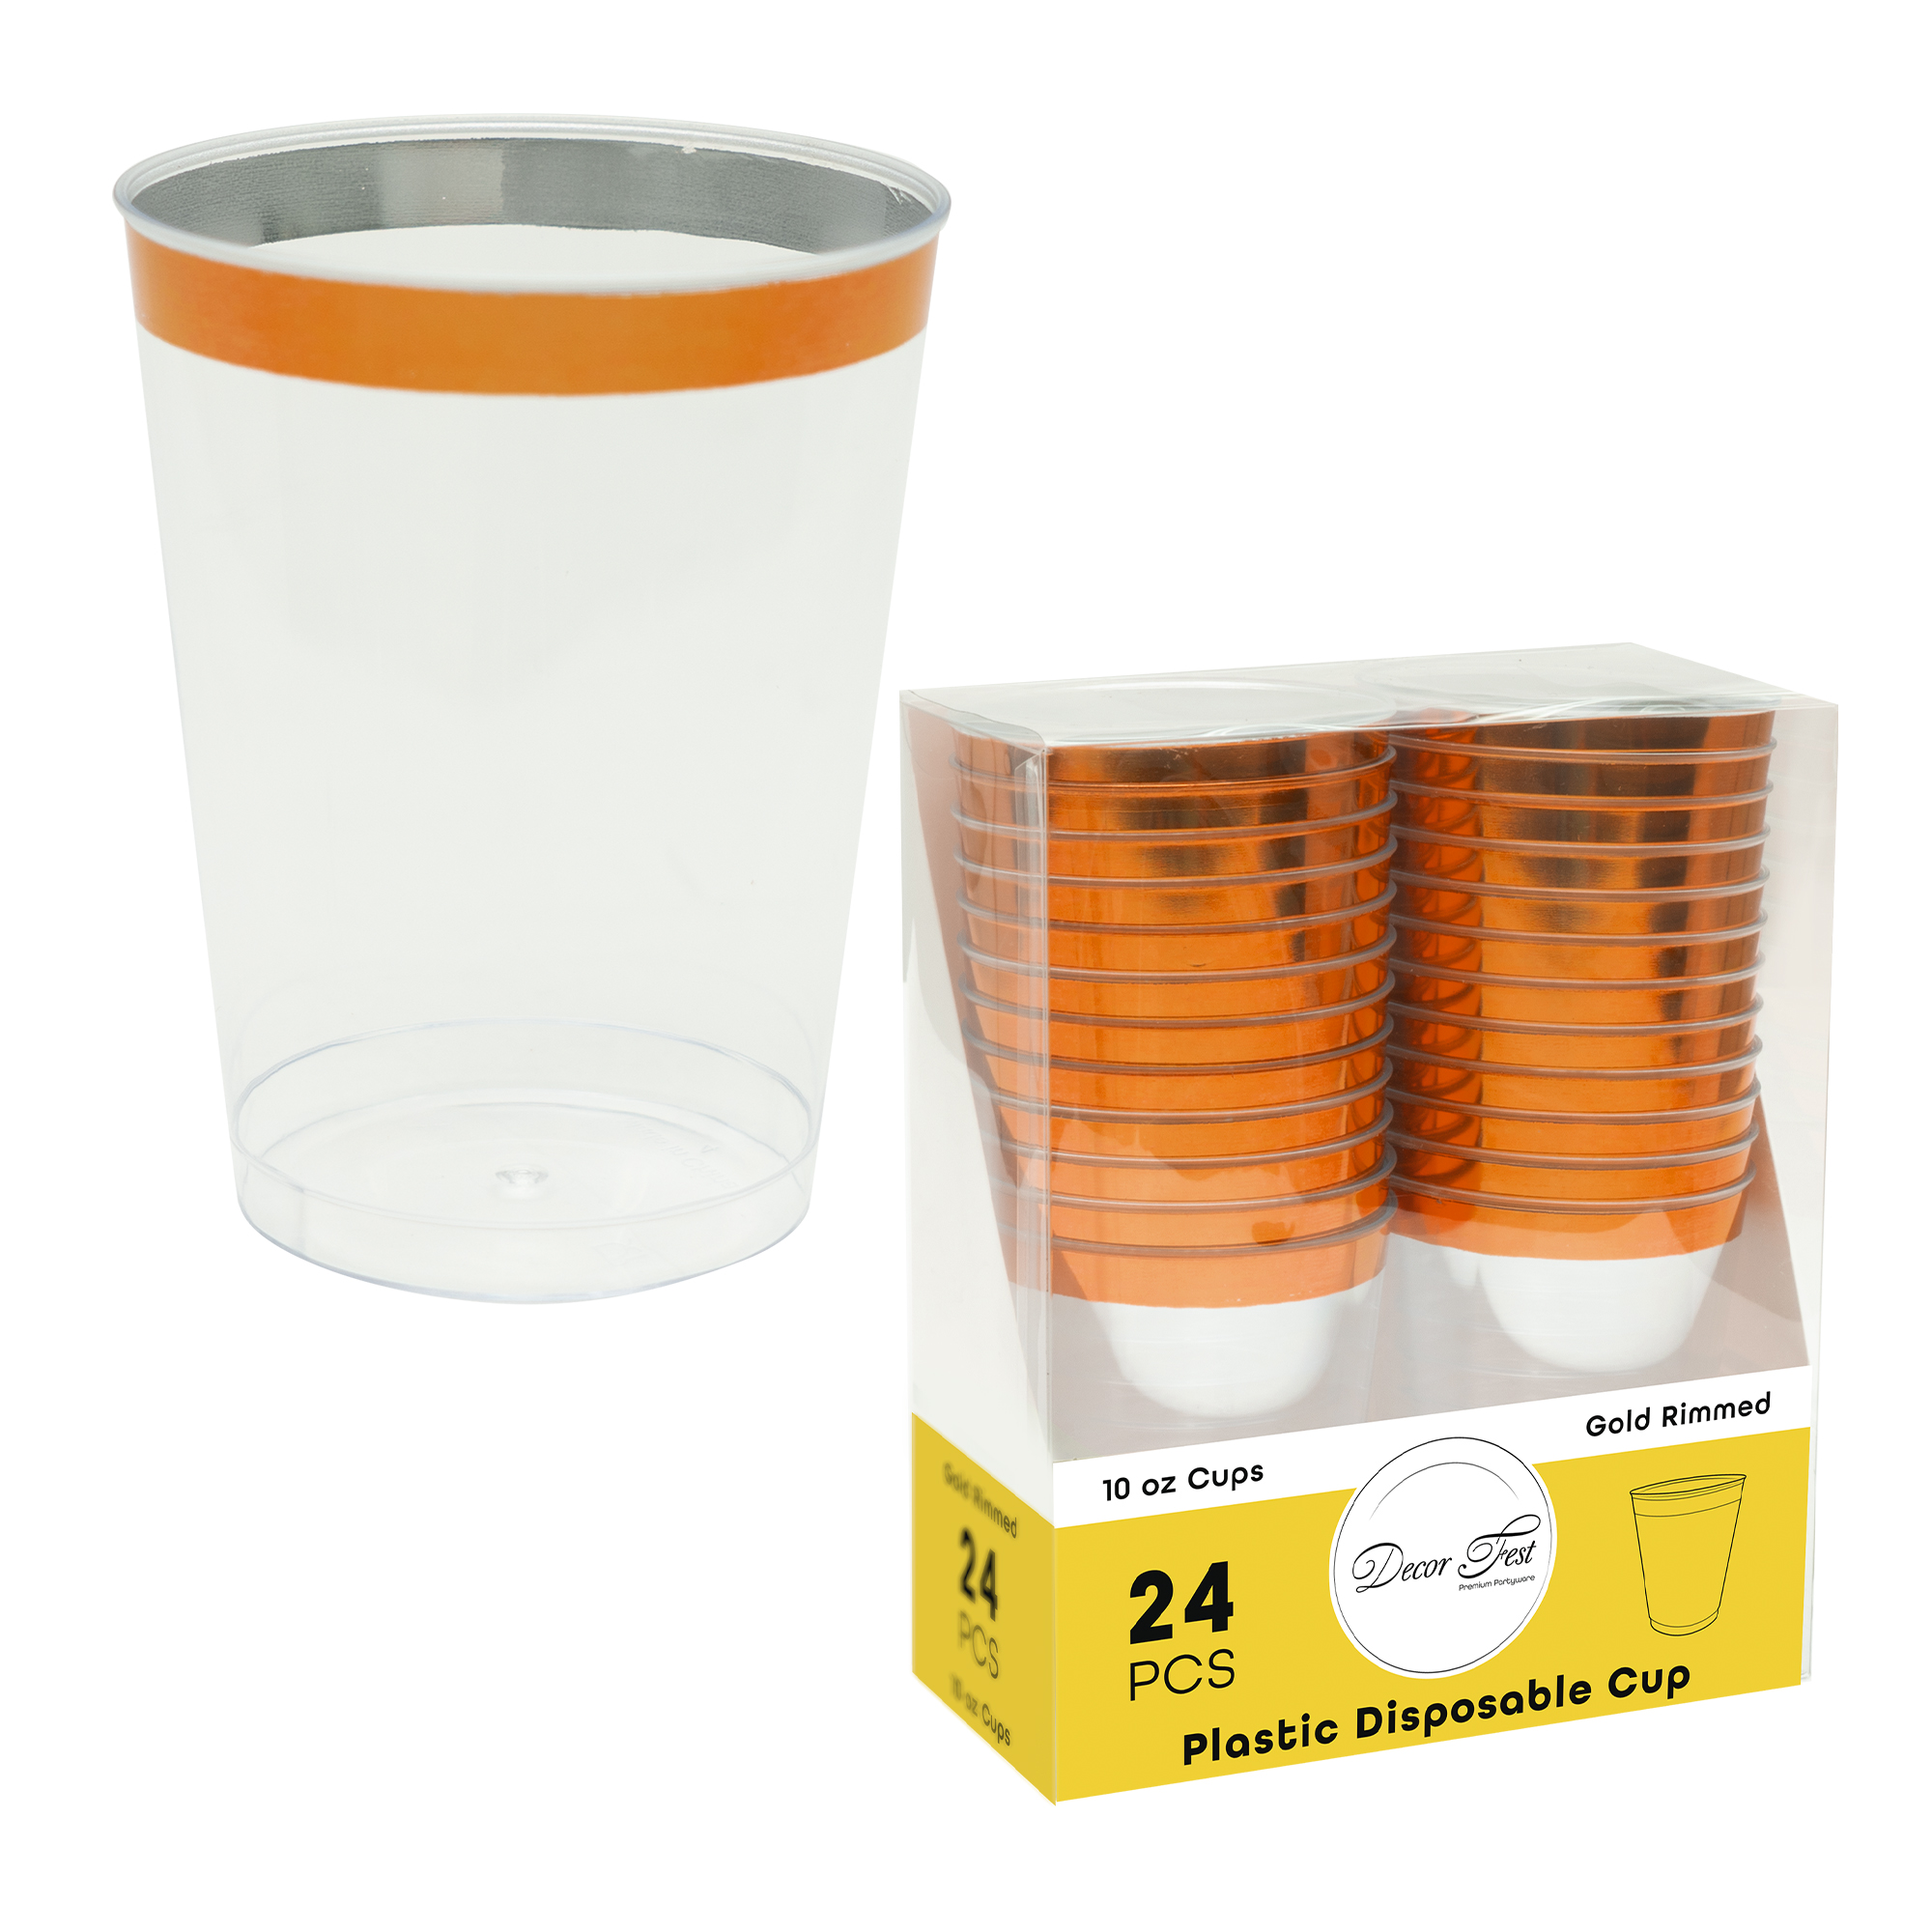 Plastic Disposable Cups with Rose Gold Rim 10oz 24pc/pack